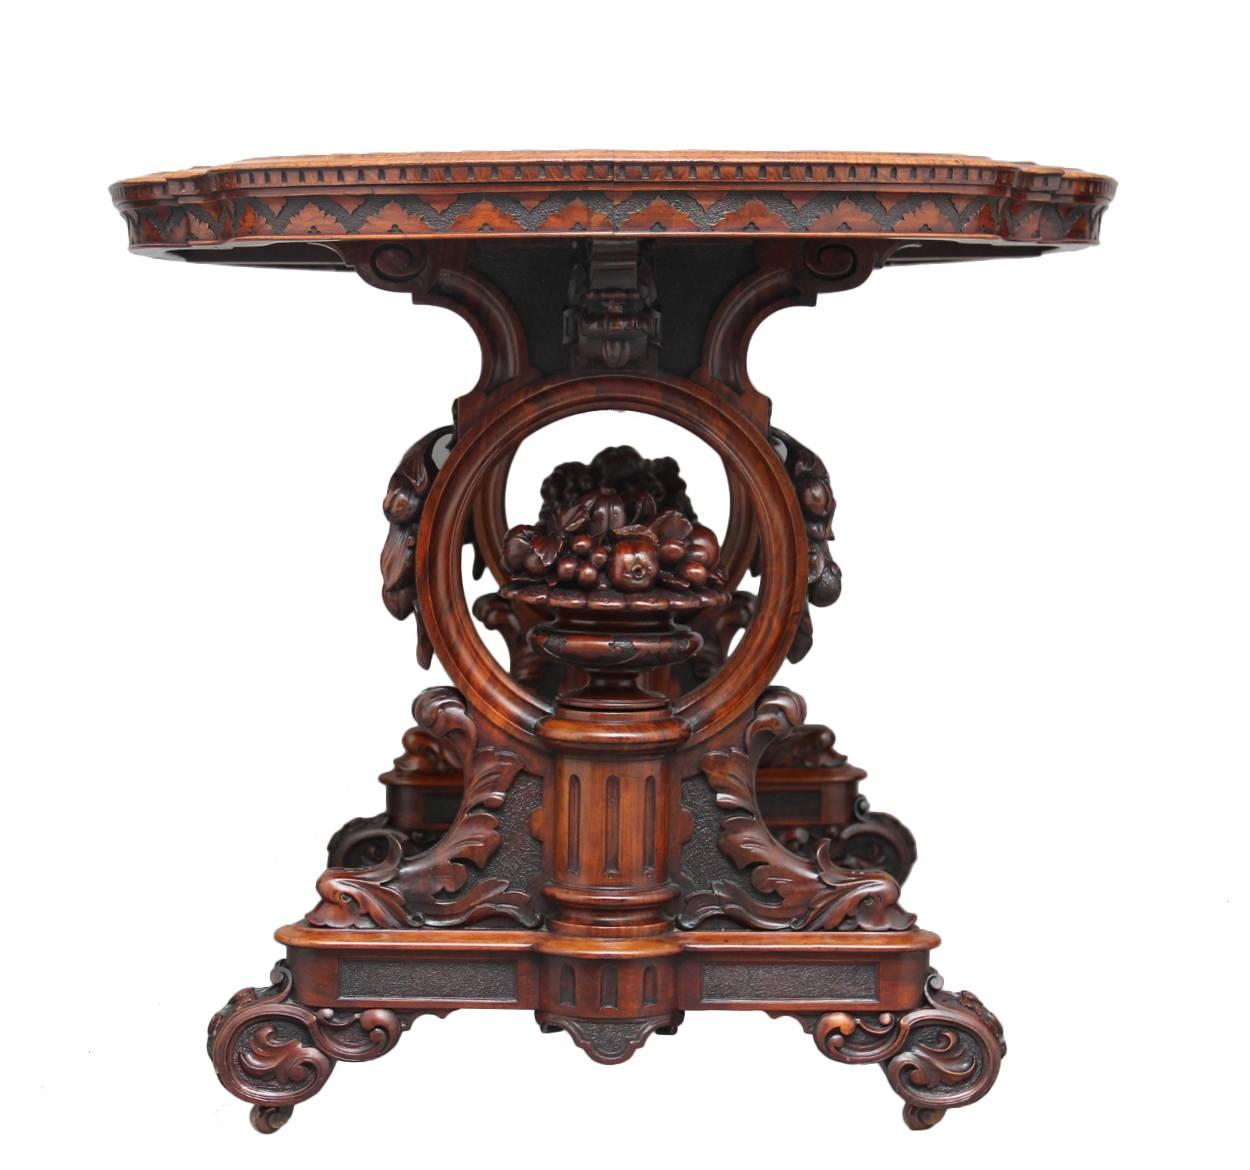 Outstanding exhibition quality burr walnut centre table, the finely carved end supports incorporating a carved bowl of fruit and flowers with in a circle with hanging fruit, he highly burr walnut quarter veneered top also has a carved edge